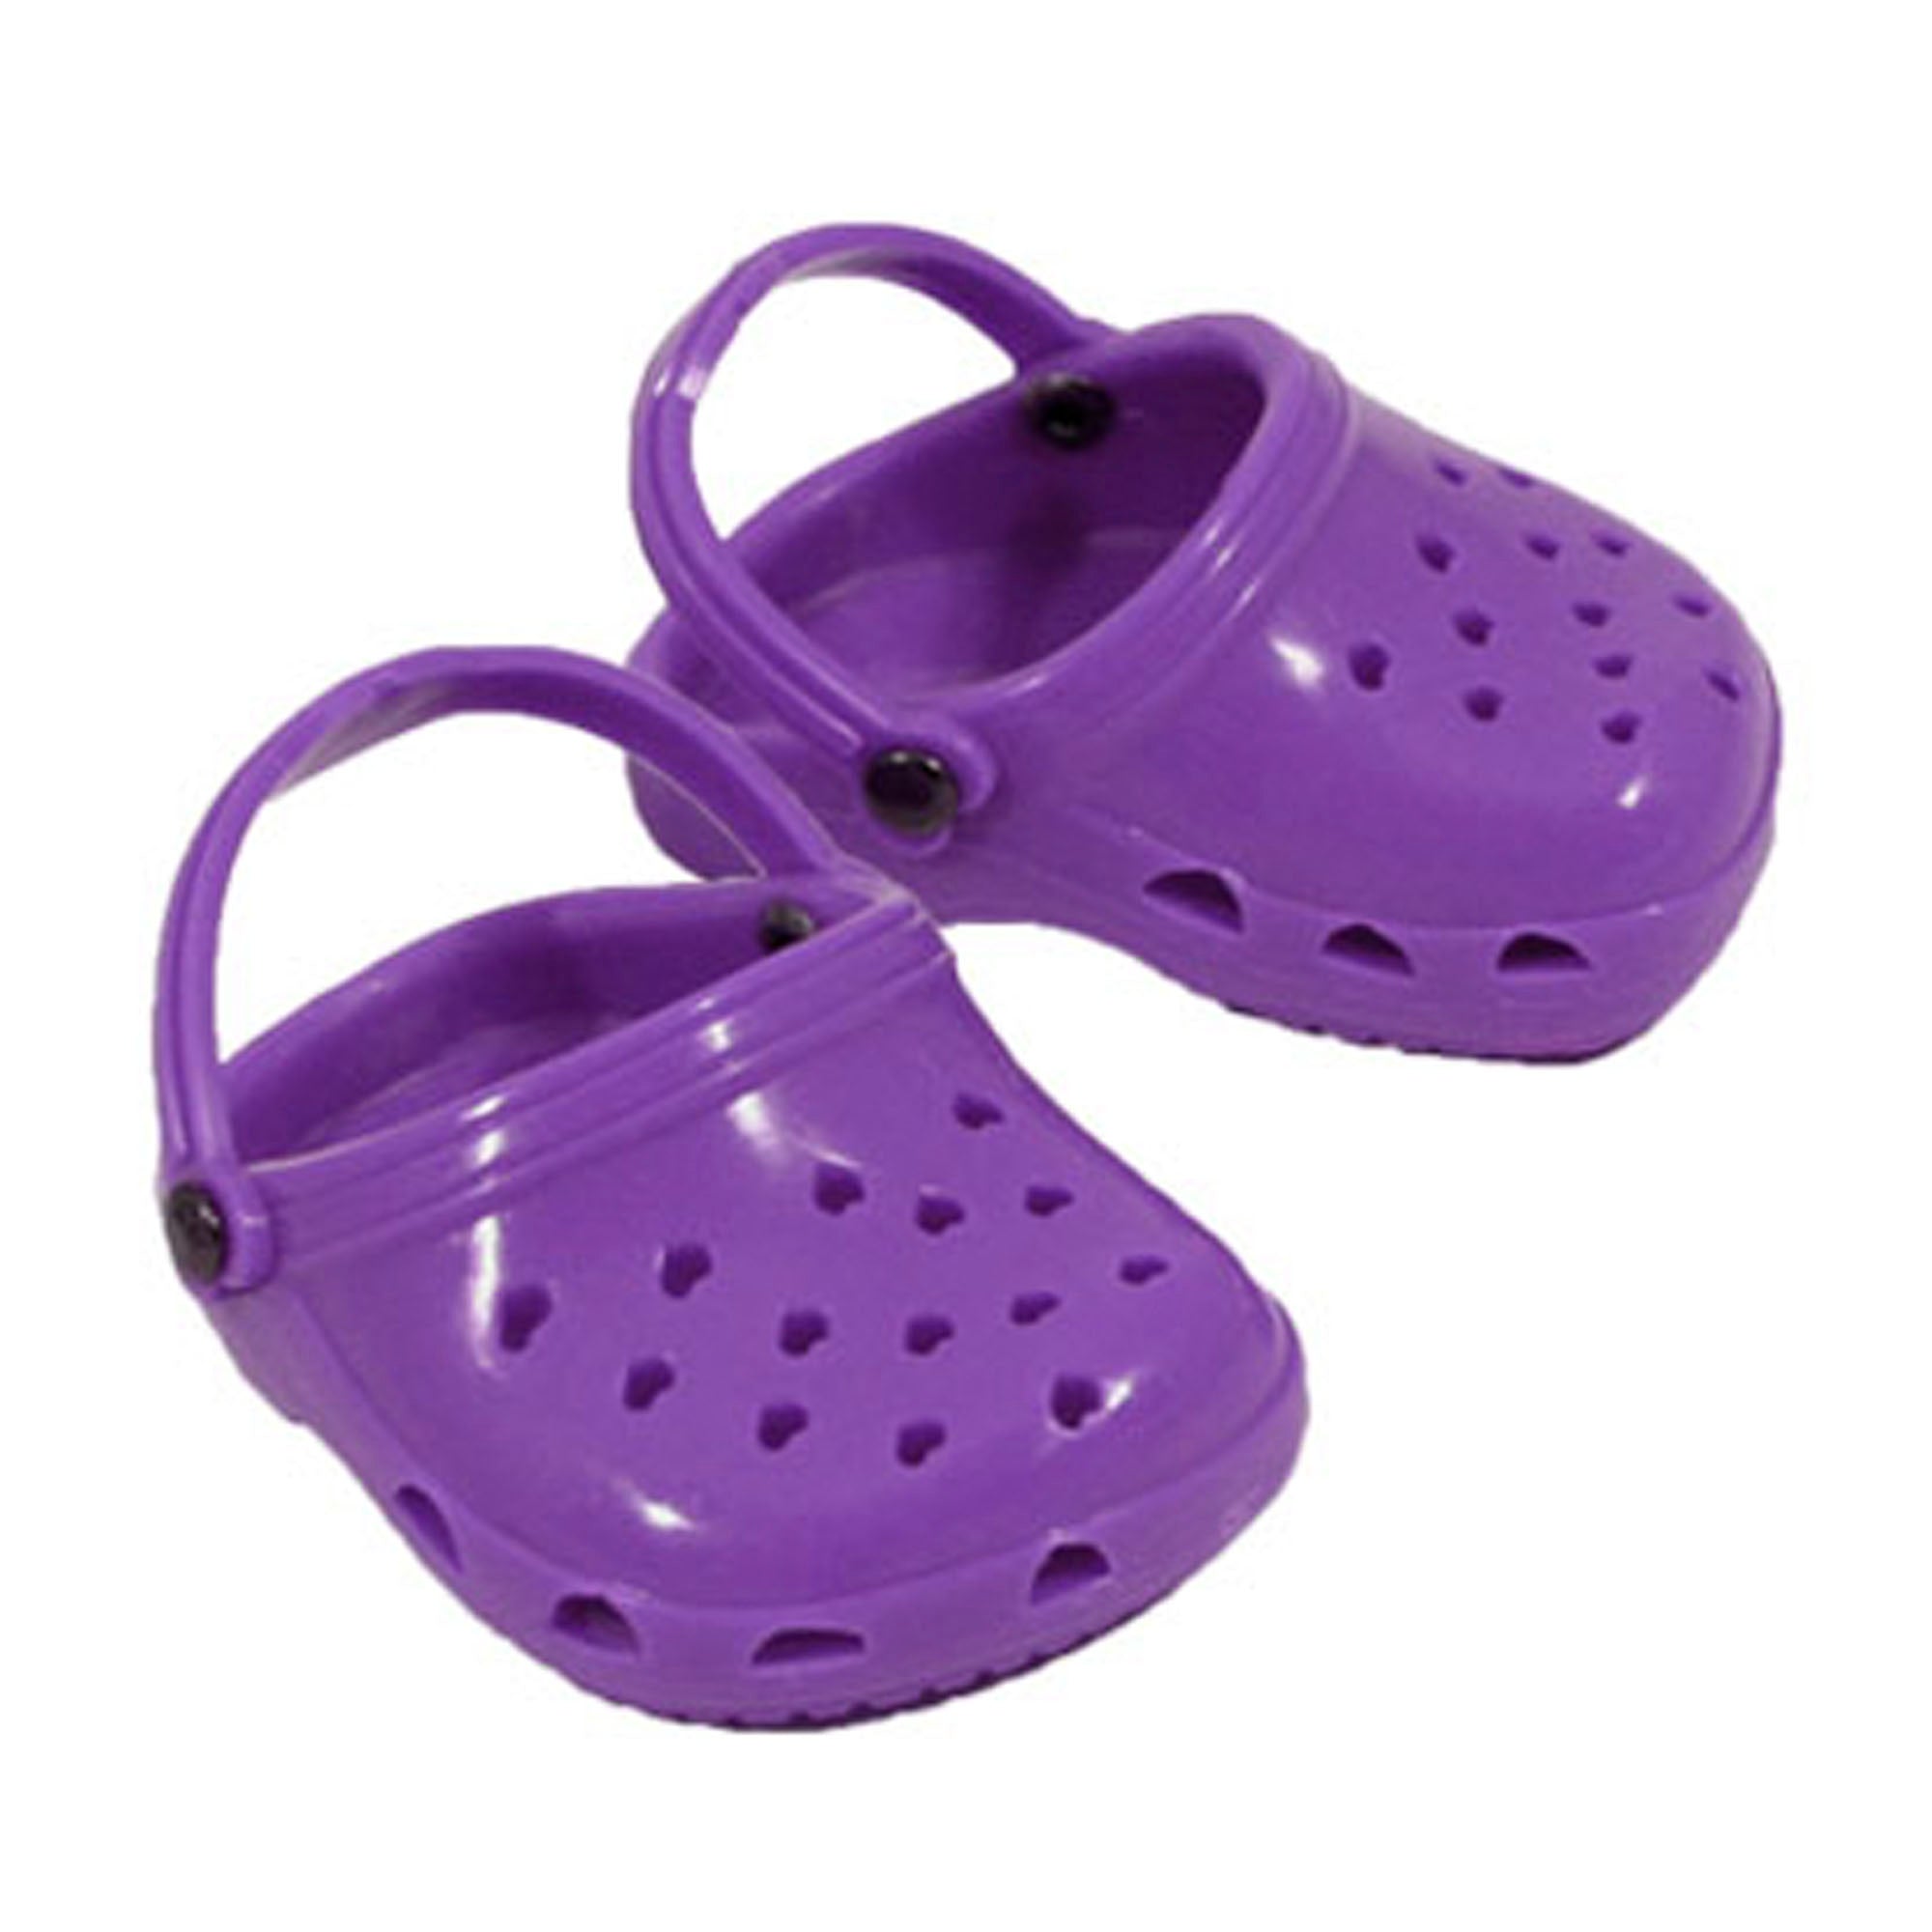 Sophia’s Croc-Inspired Slip-On Casual Solid-Colored Mix & Match Polliwog Shoes for 18” Dolls, Purple